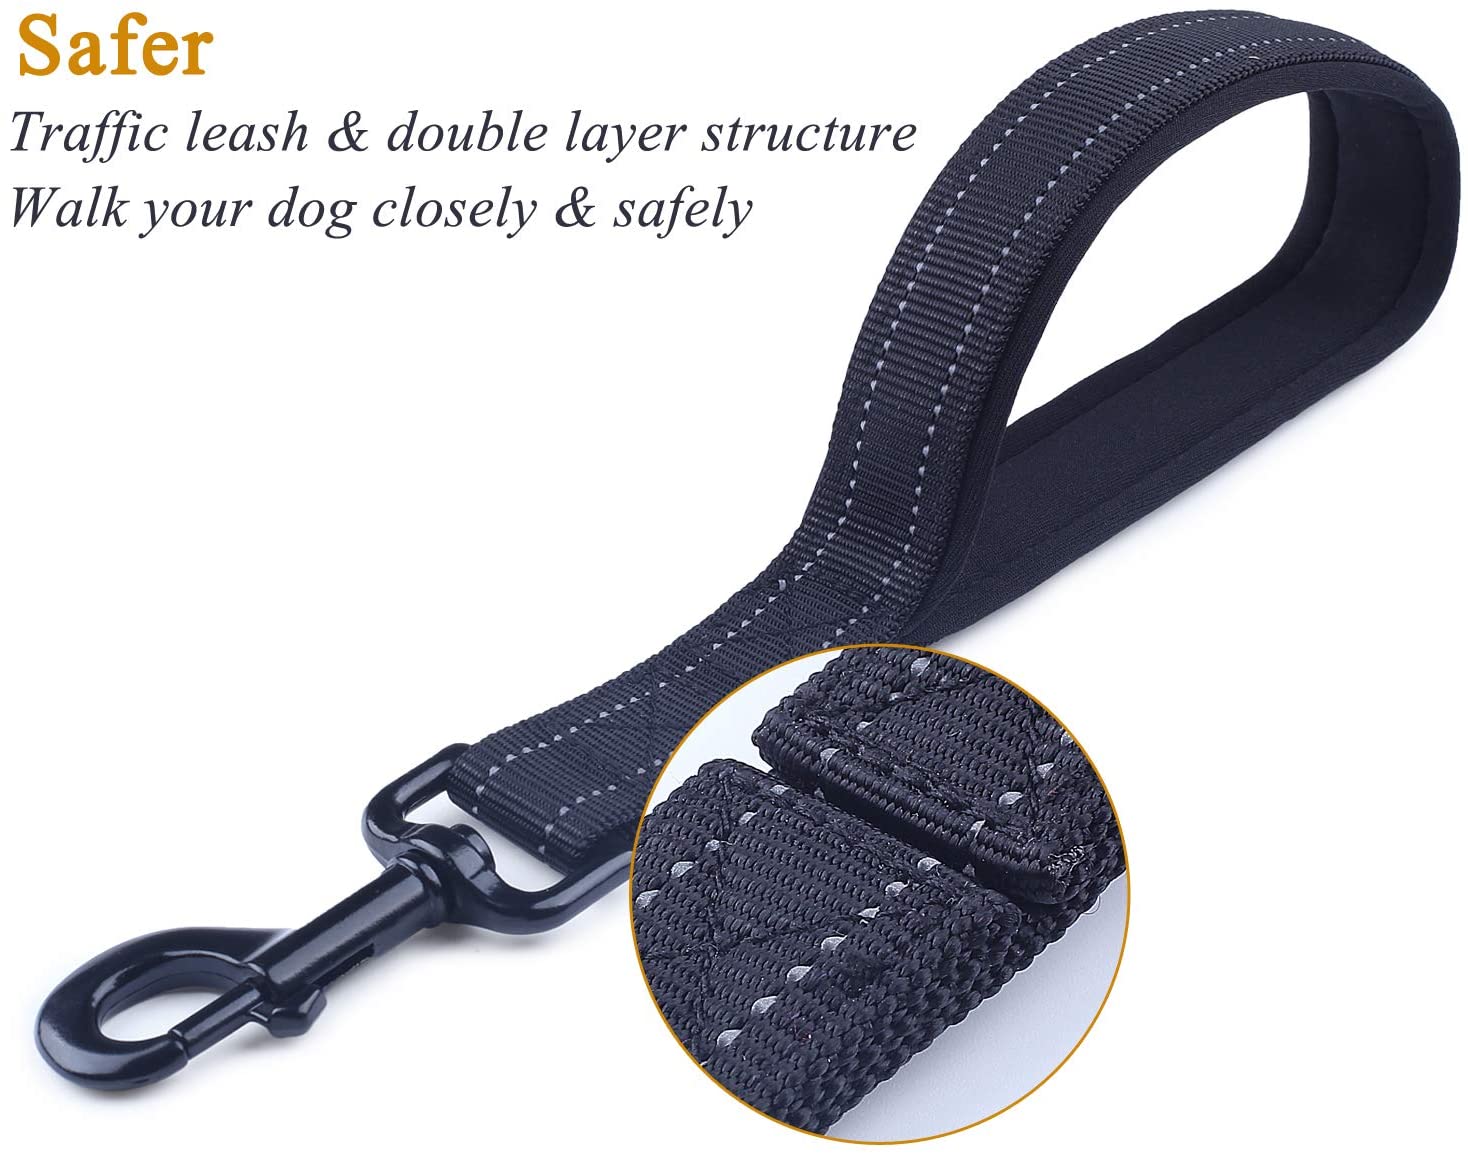 VIVAGLORY Short Dog Leash with Padded Handle  - 12 inch - e4cents